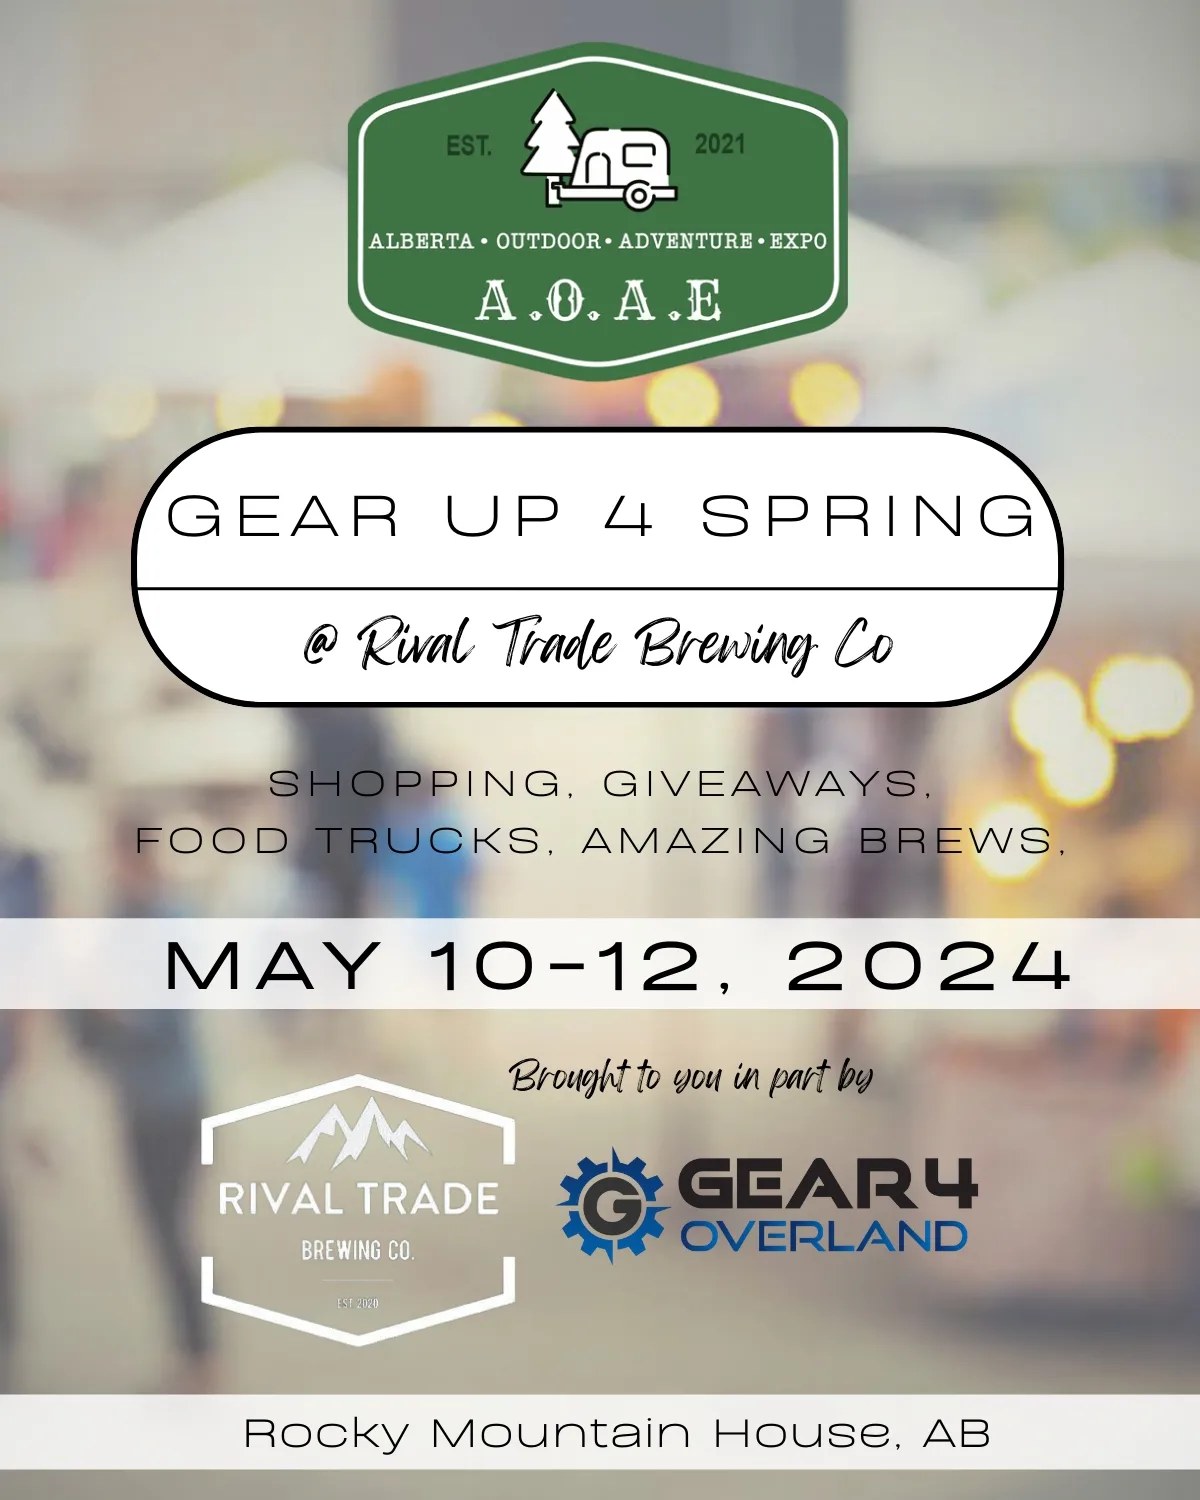 Gear Up 4 Spring at Rival Trade Brewing Co